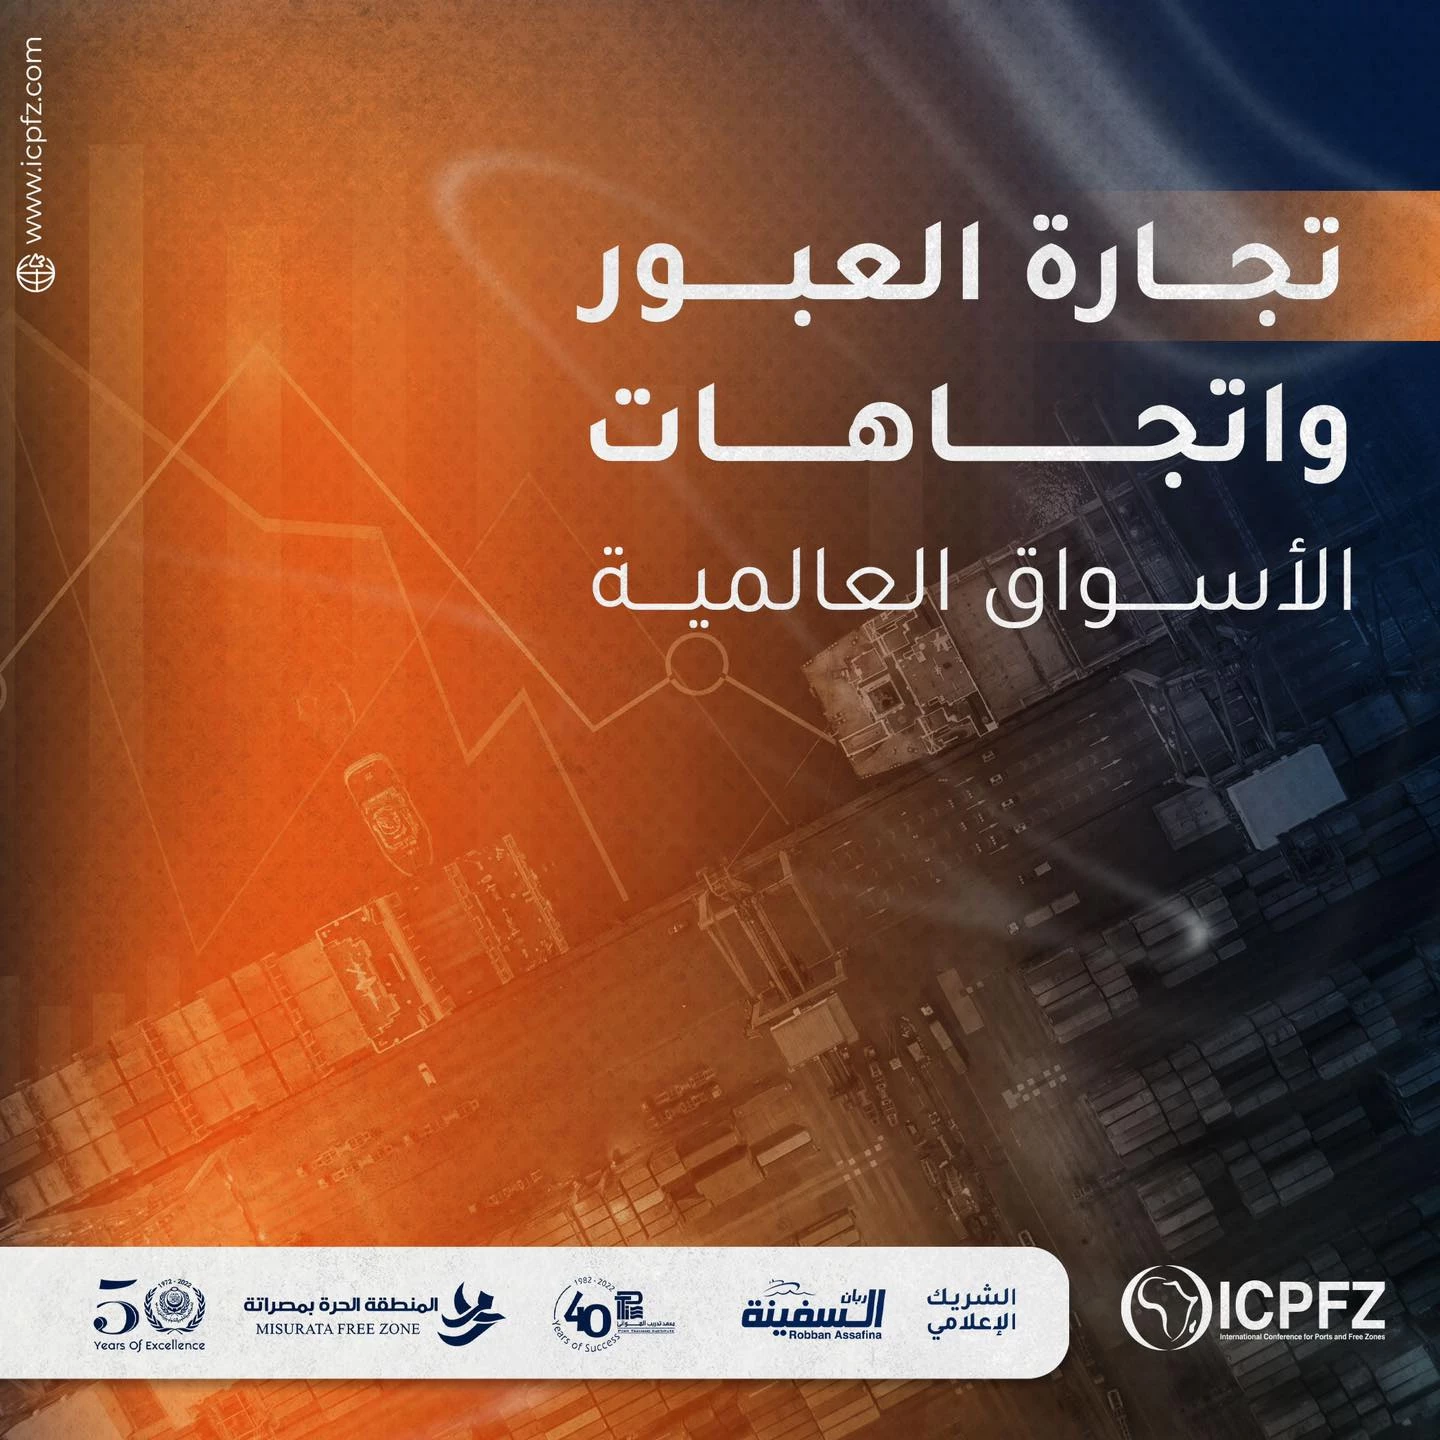 The International North African Ports and Free Zones Conference and Exhibition3